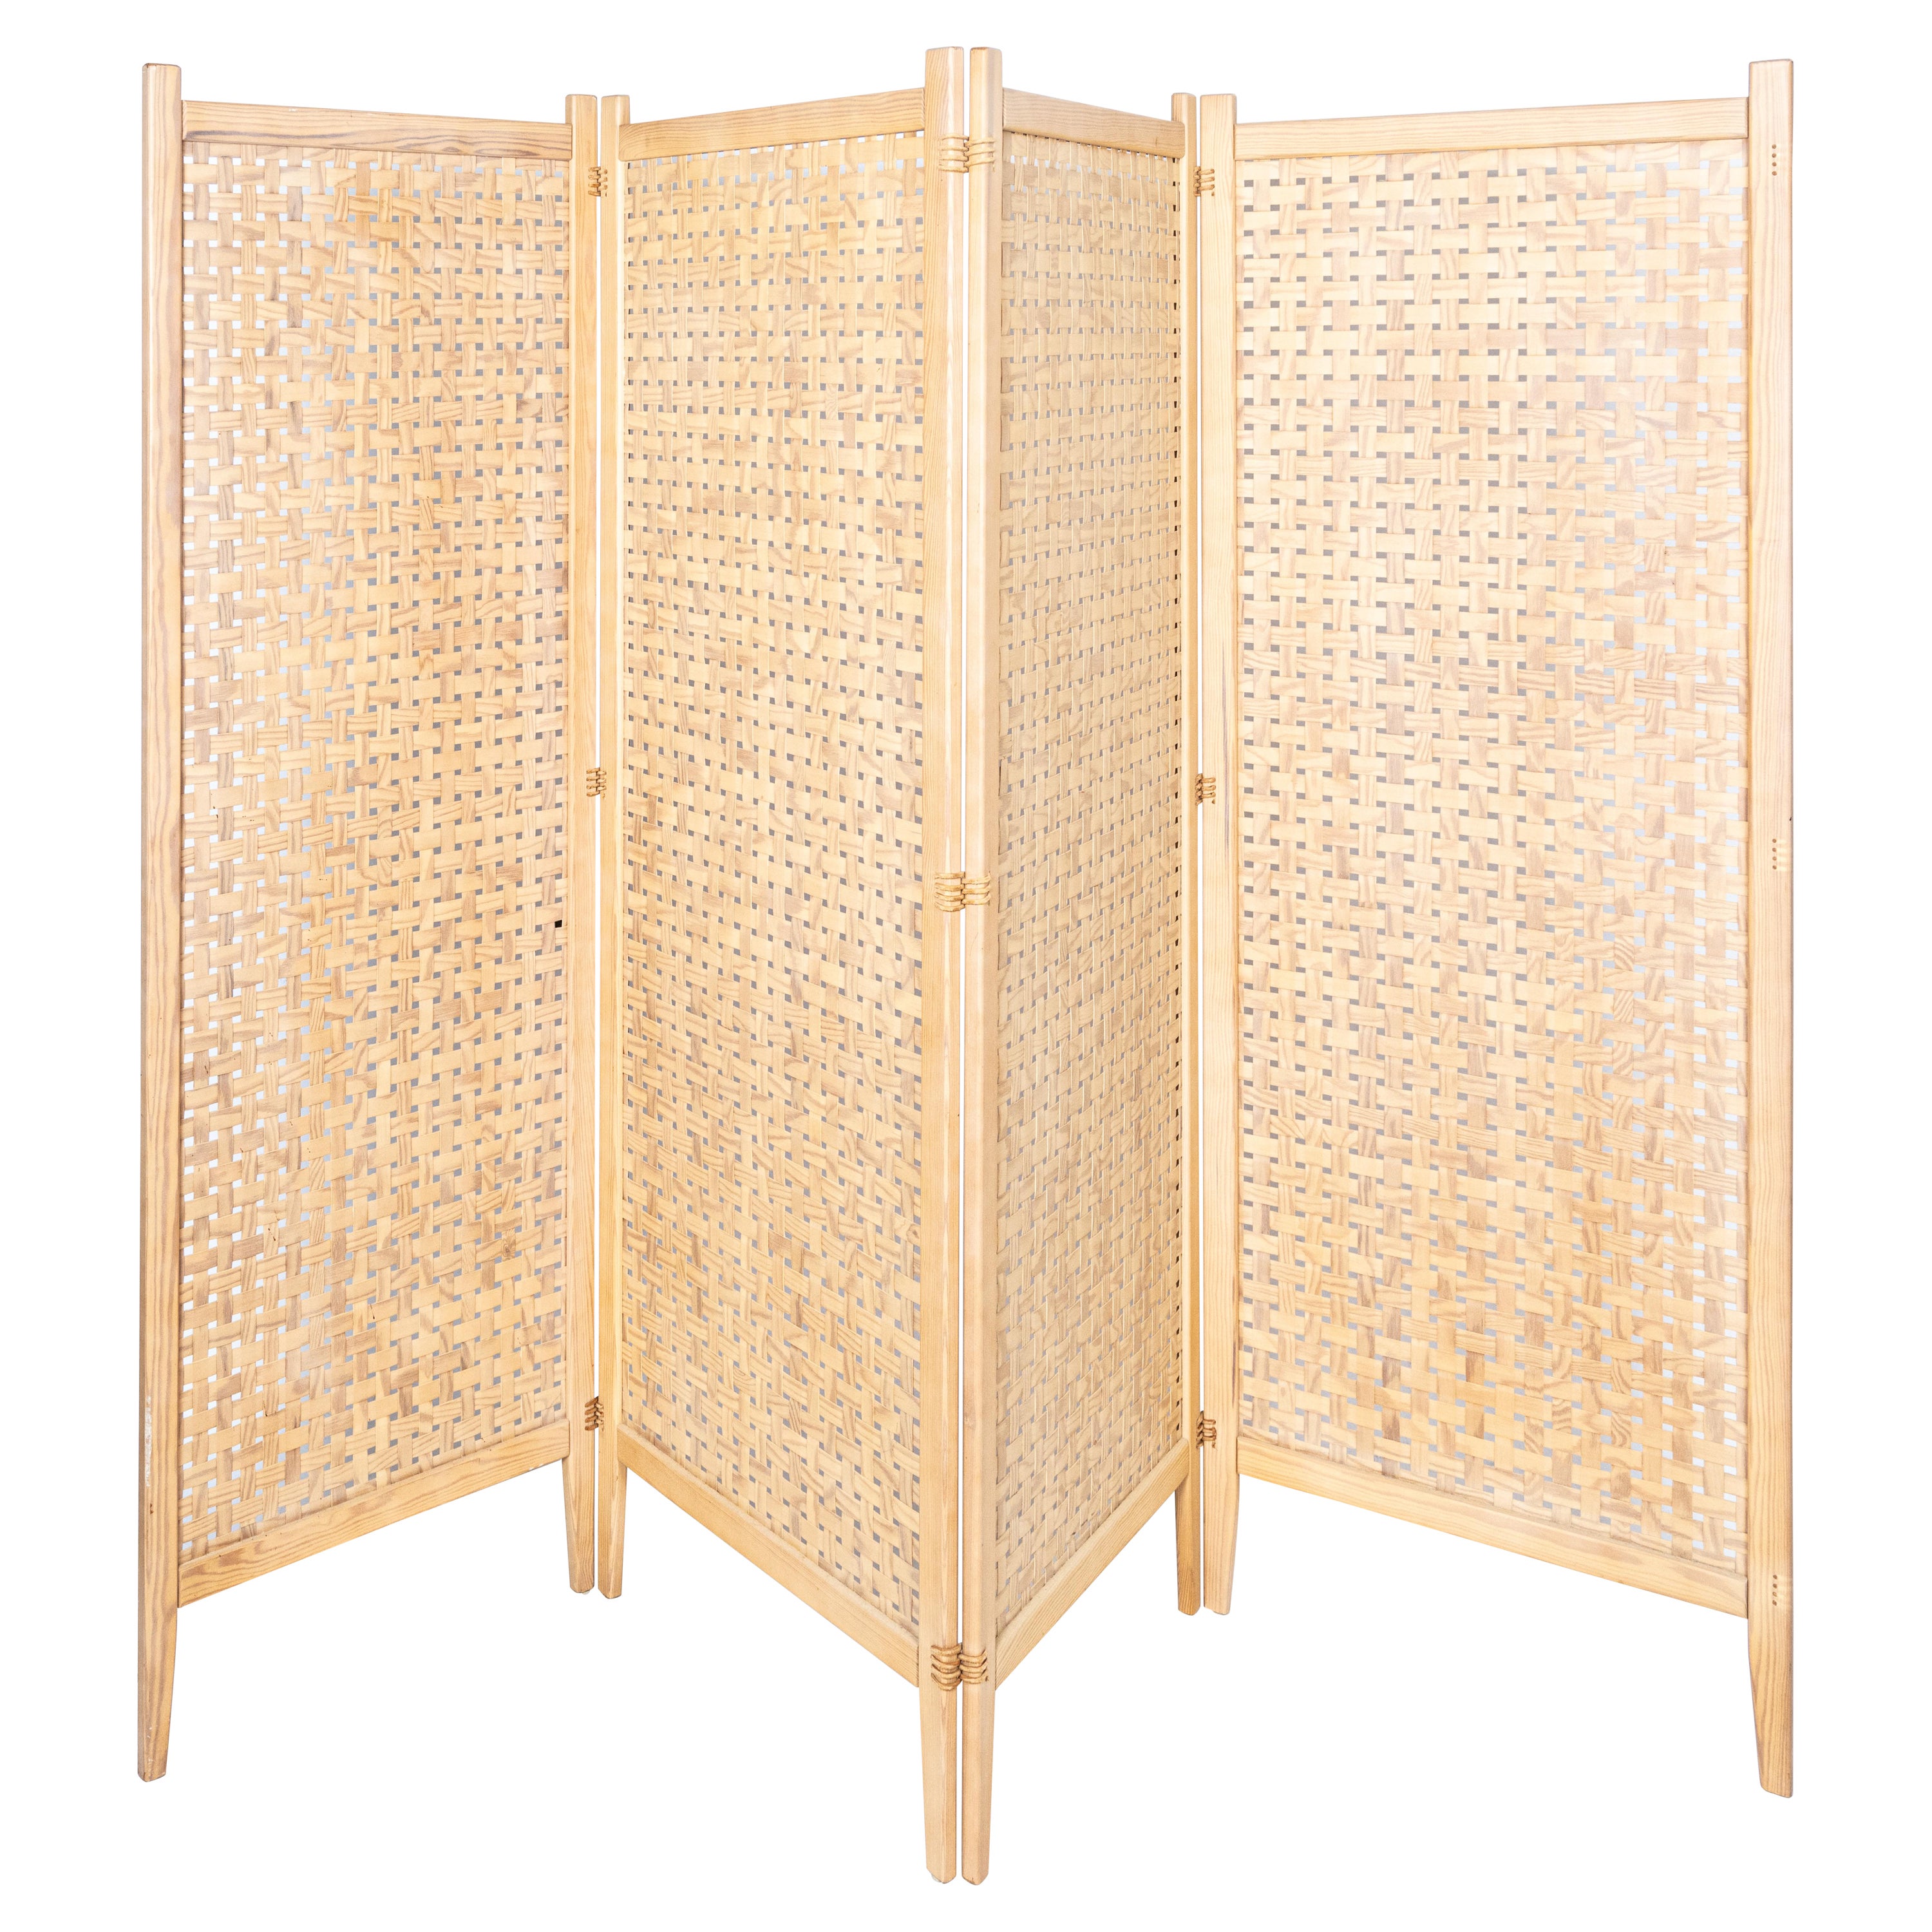 Alberts Tibro ‘Spåna’ Folding Screen Wood and Leather For Sale